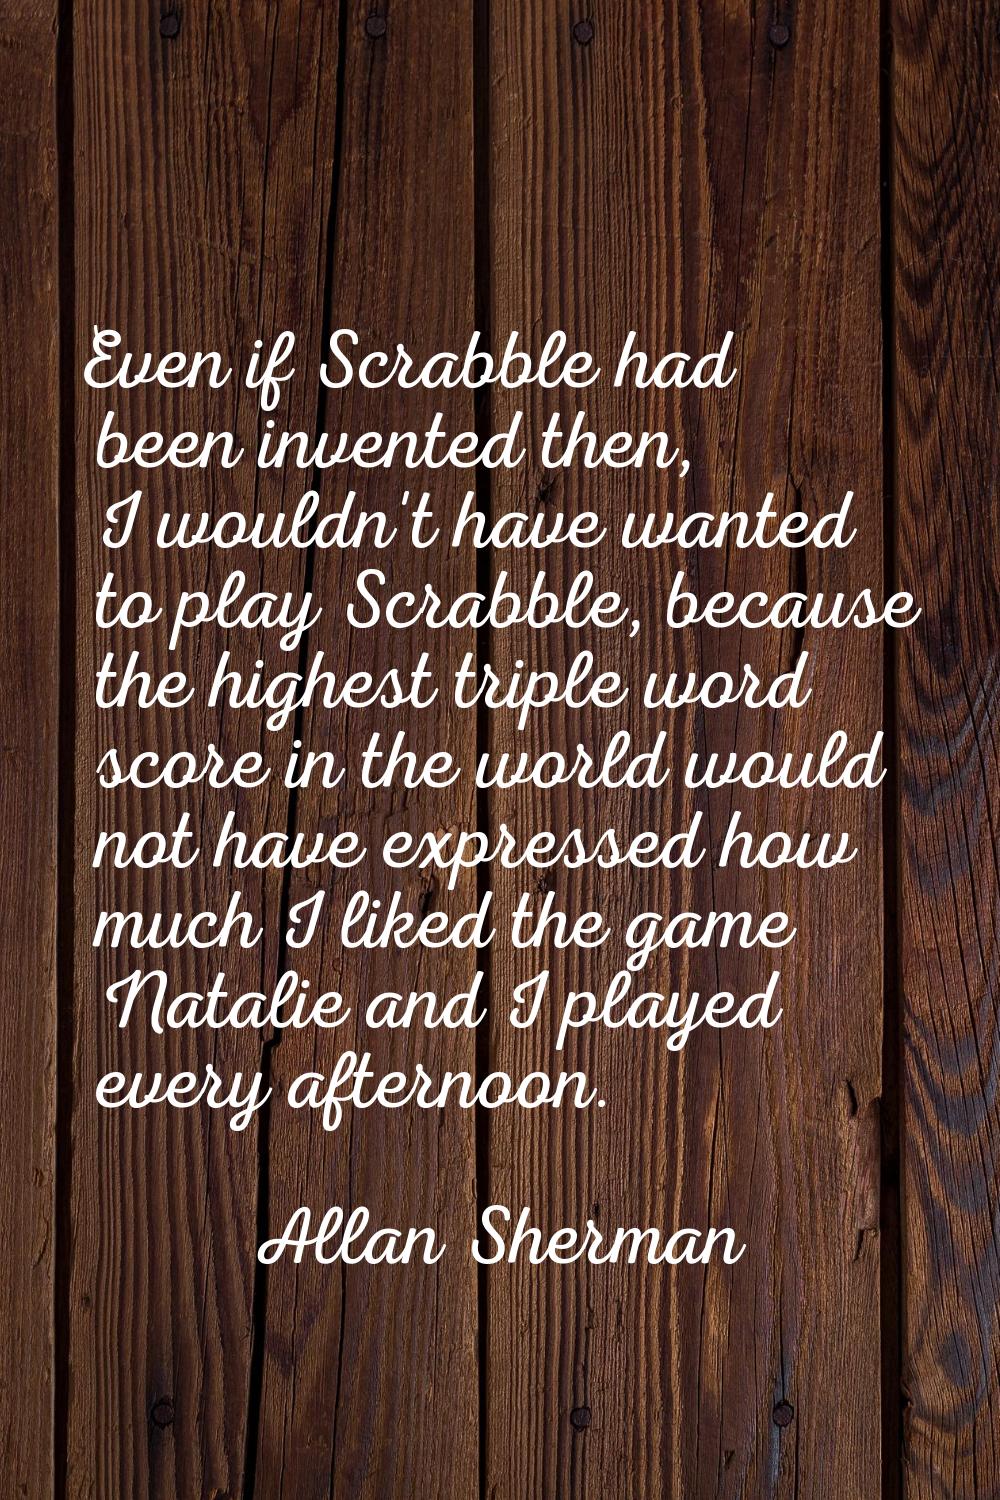 Even if Scrabble had been invented then, I wouldn't have wanted to play Scrabble, because the highe